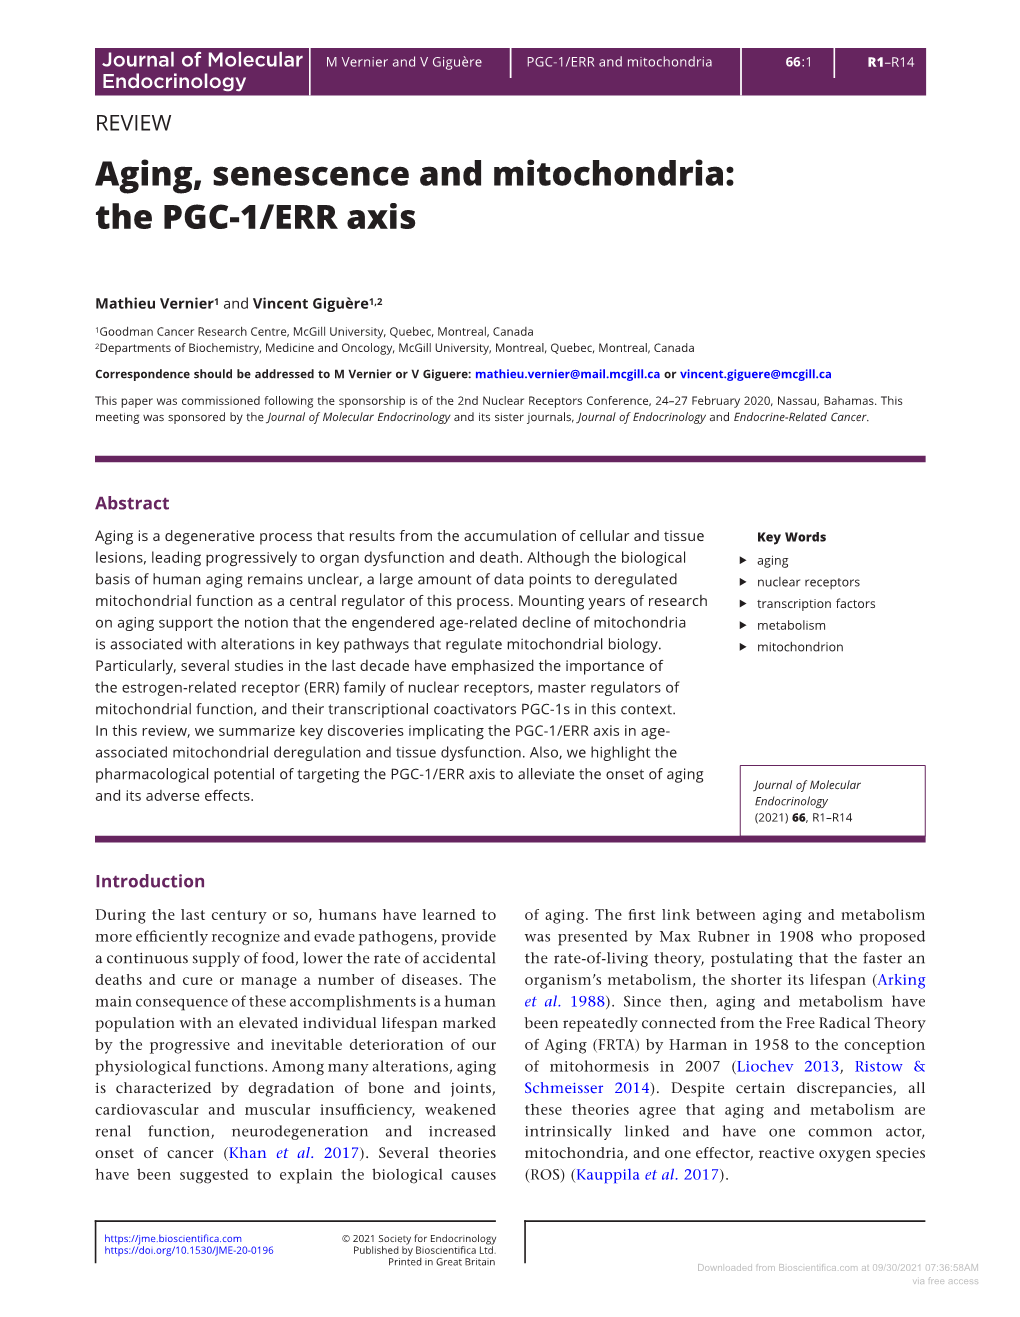 Aging, Senescence and Mitochondria: the PGC-1/ERR Axis